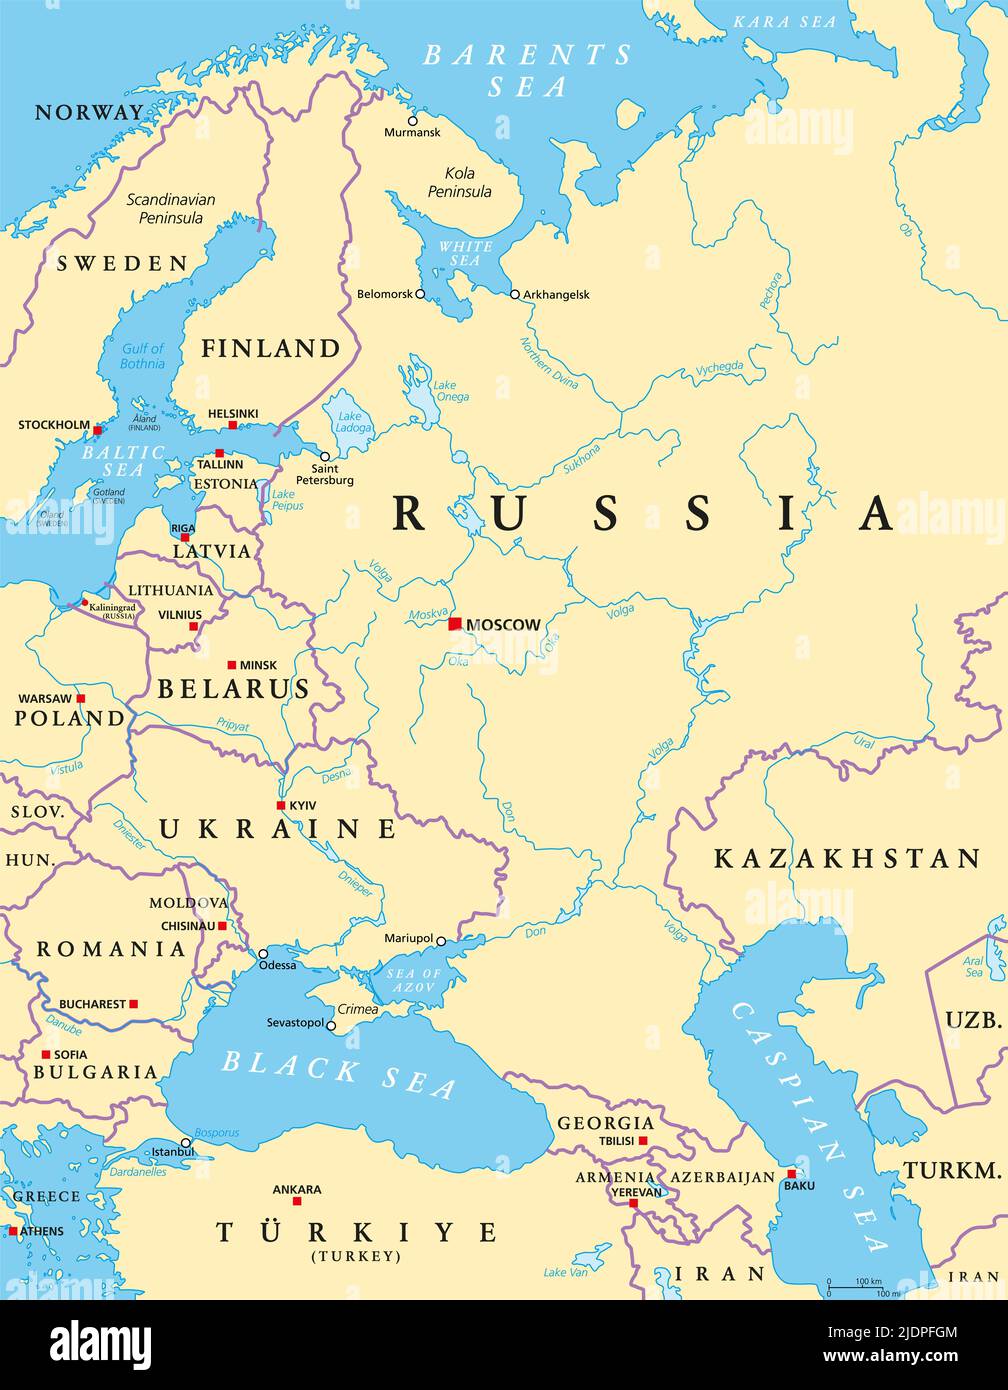 Eastern Europe and Western Asia, political map, with capitals and borders. With Black Sea, Caspian Sea, European Russia, and part of Central Asia. Stock Photo